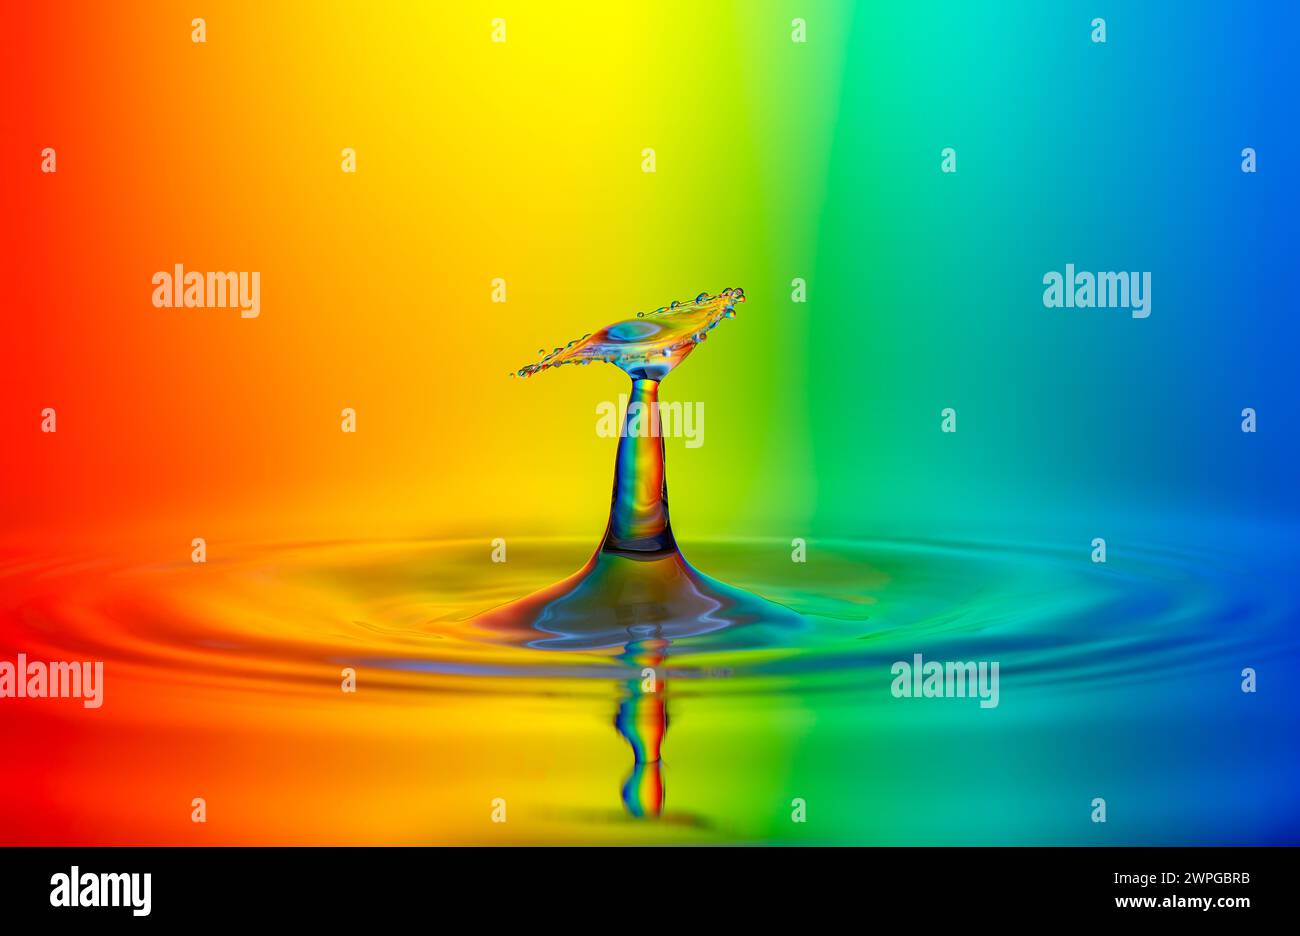 Water droplets with rainbow-colored background Stock Photo